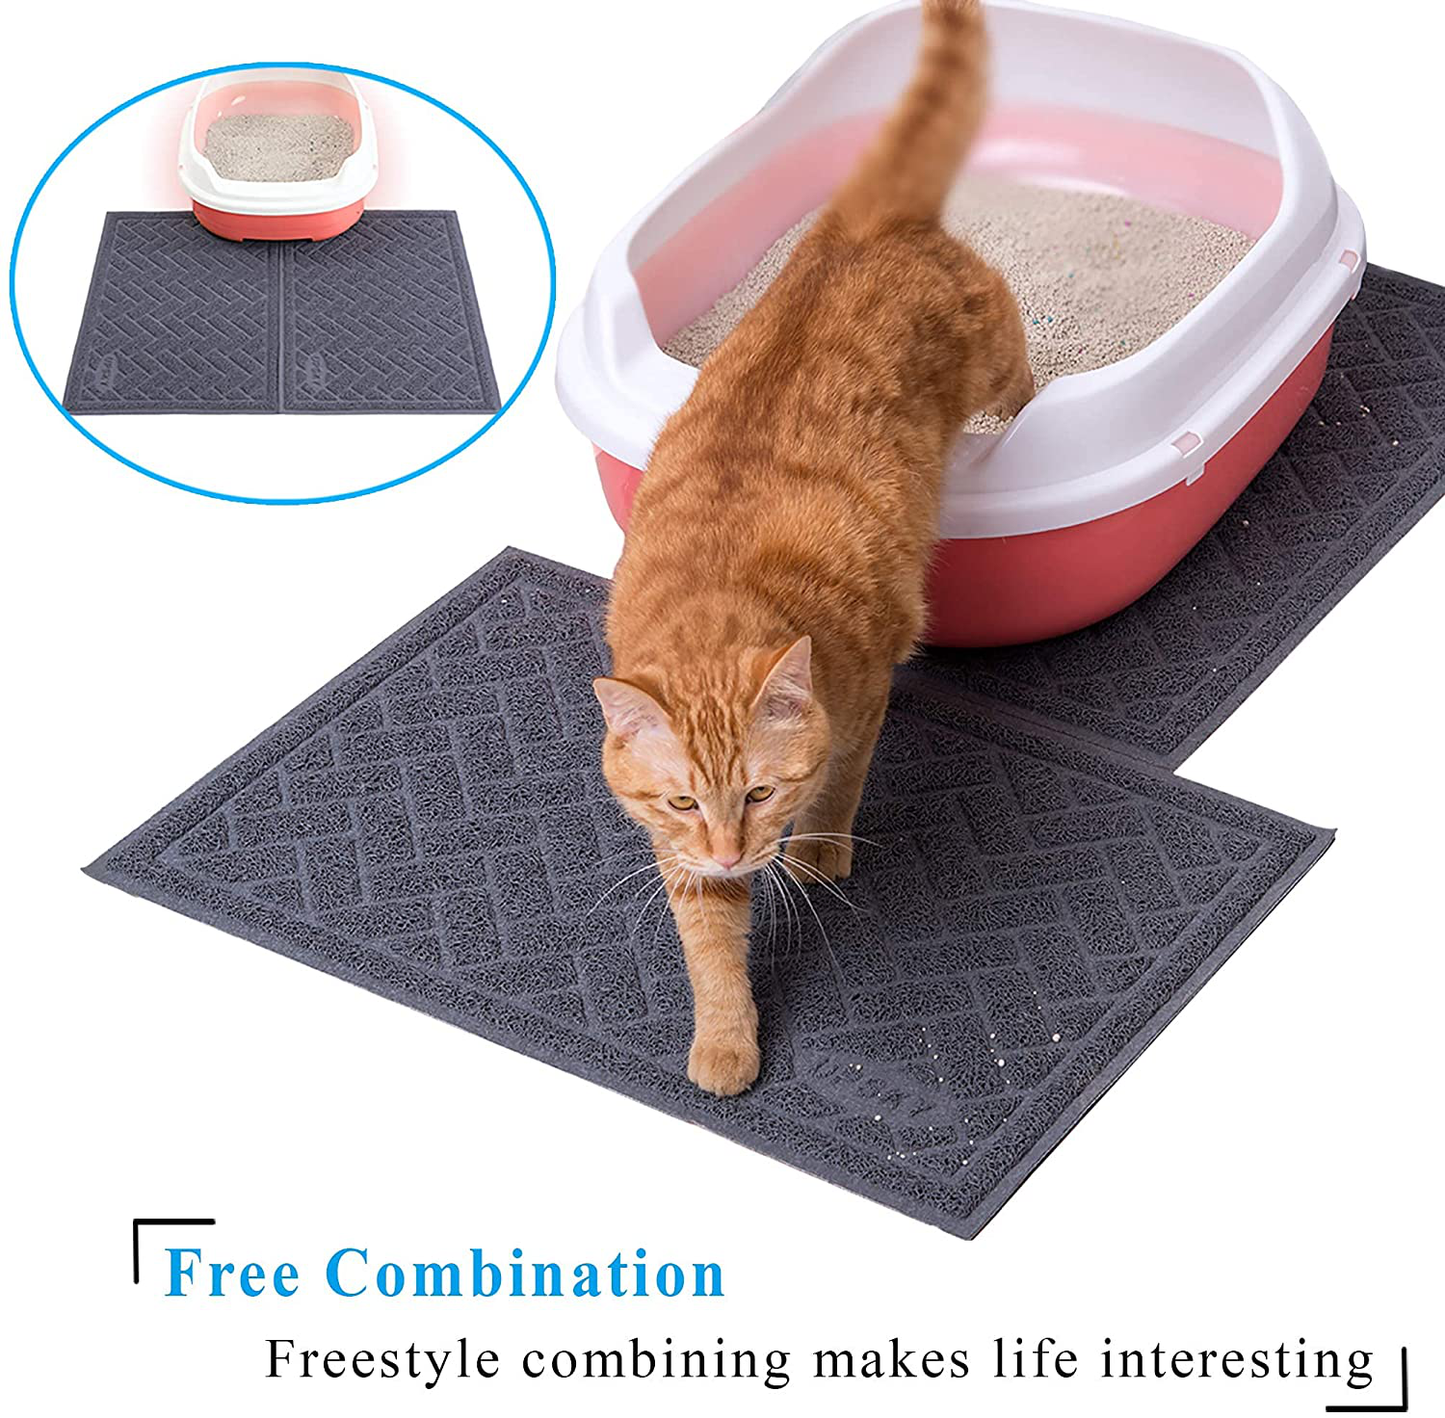 UPSKY Cat Litter Mats 2 Pieces Cat Litter Pad, Premium Traps Litter from Box and Paws, Scatter Control for Litter Box, Soft on Sensitive Kitty Paws, Easy to Clean. (24’’ X 16’’)